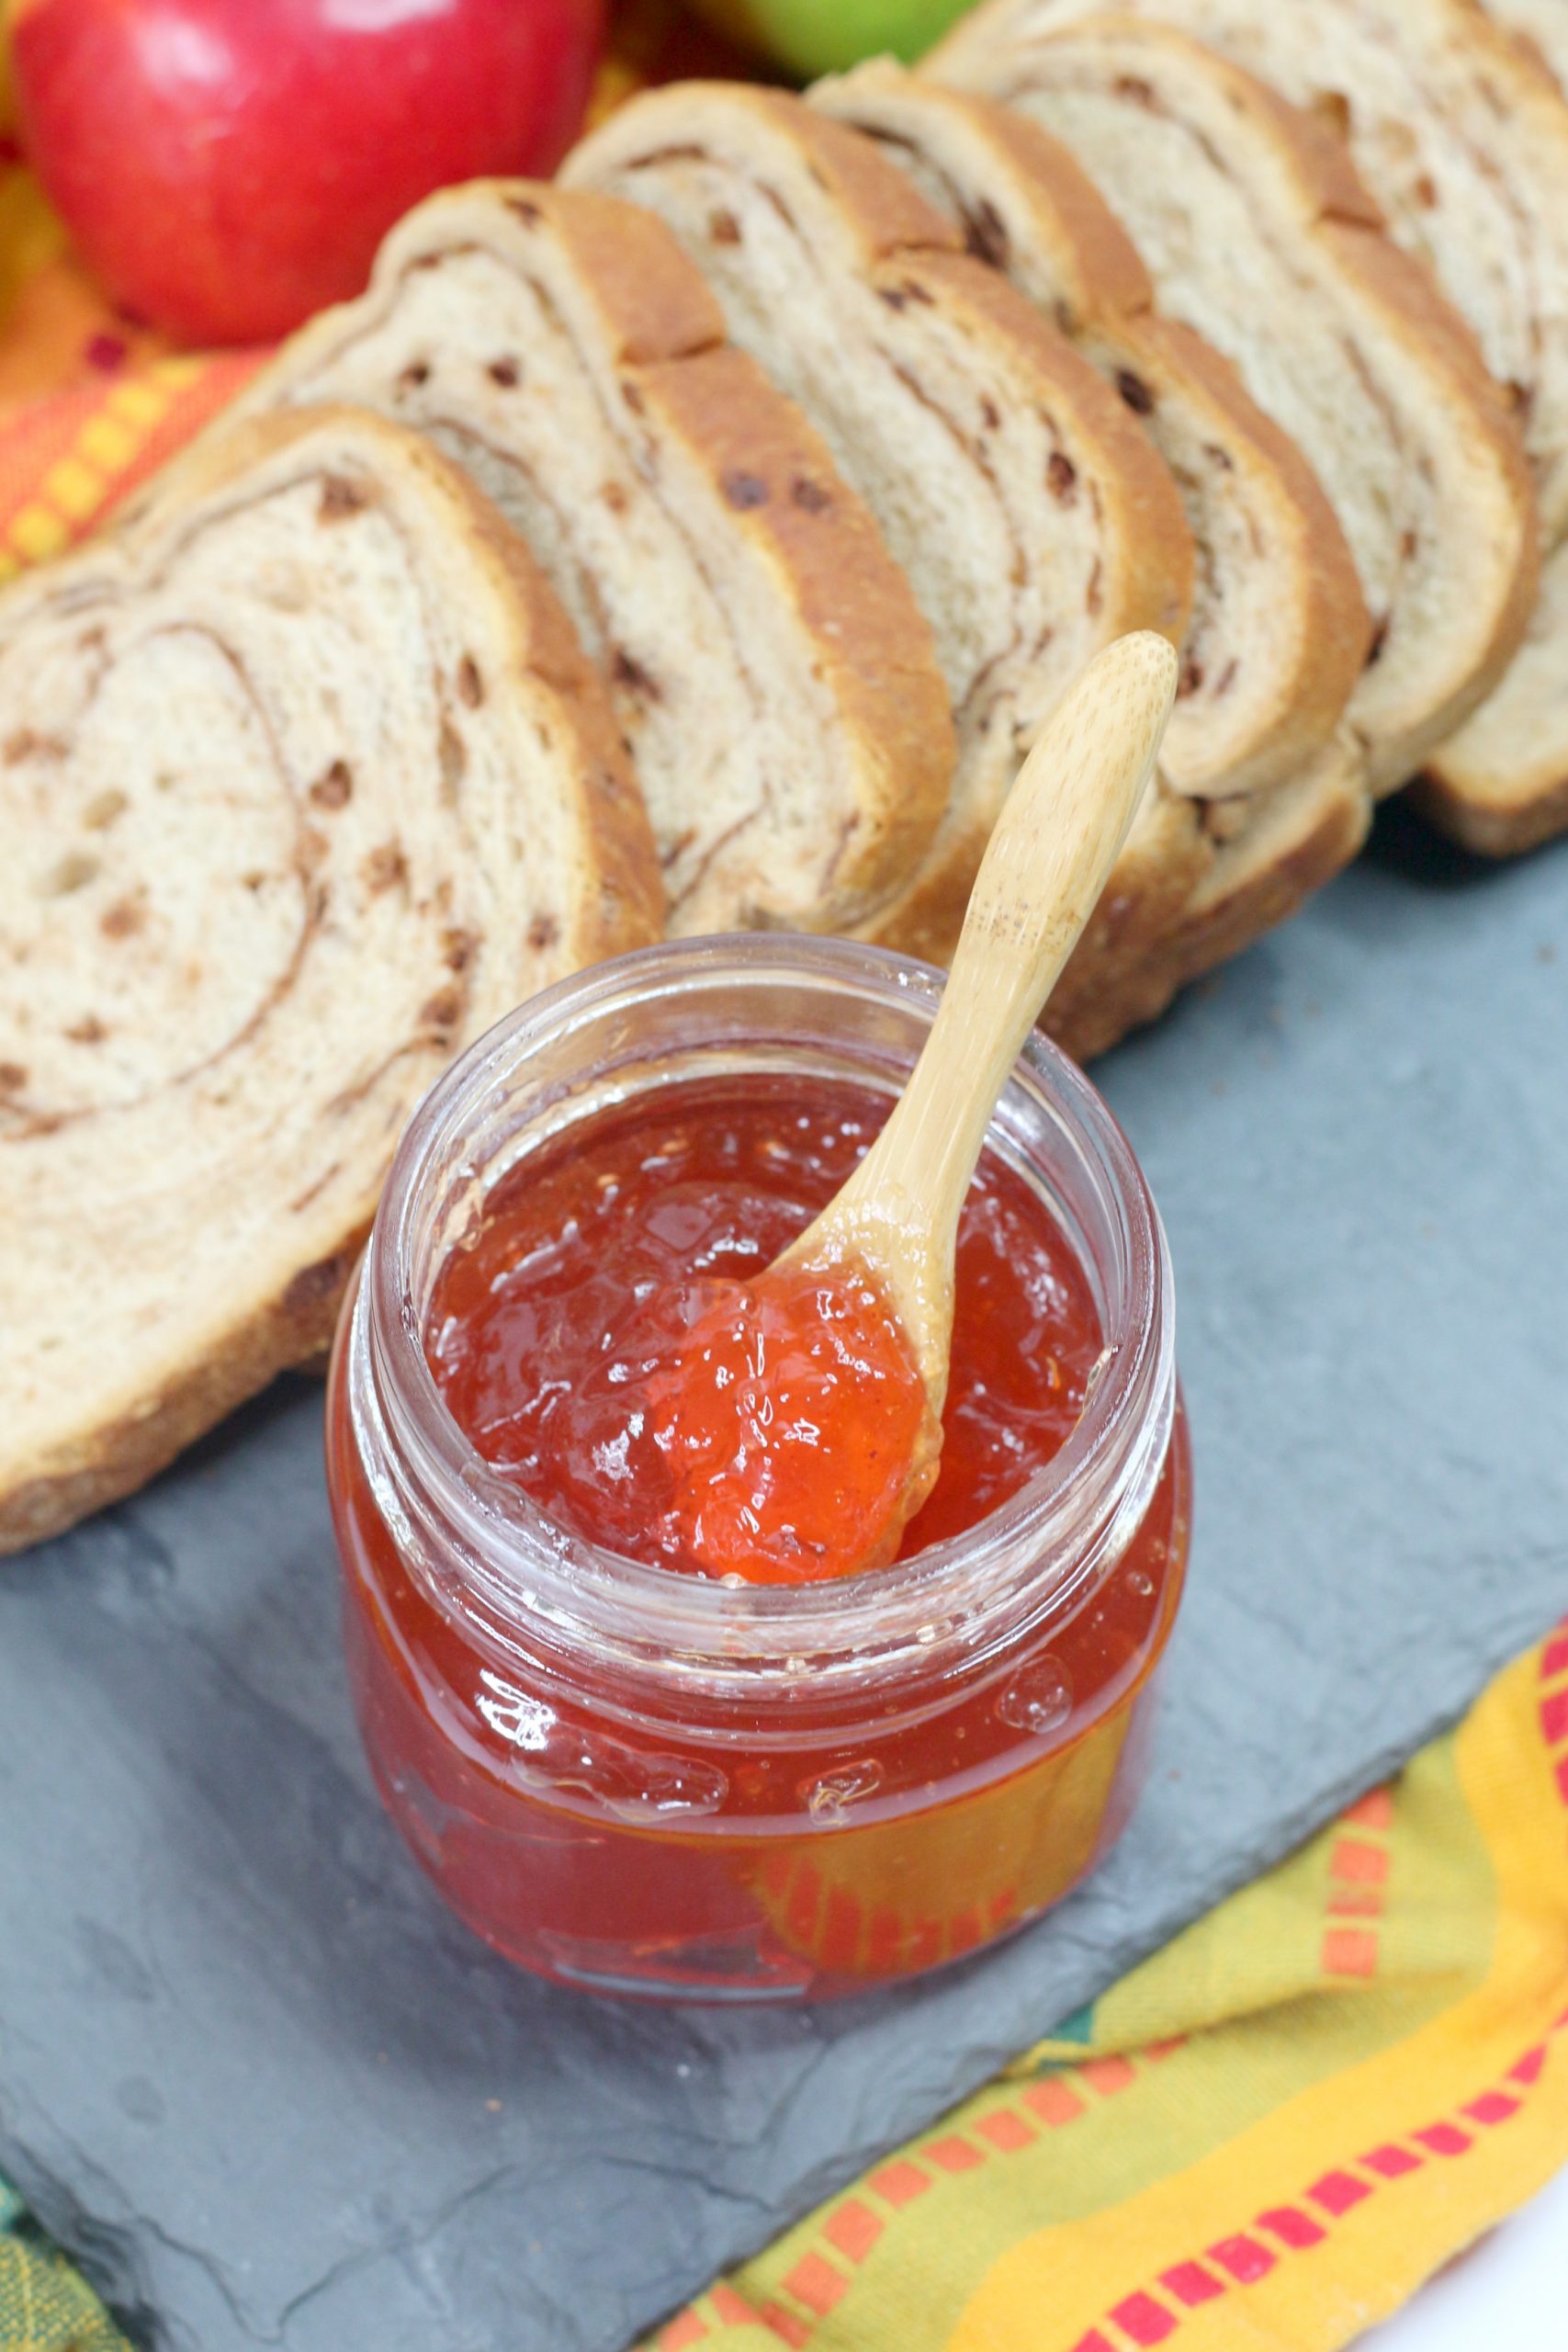 Spiced Apple Cider Jelly